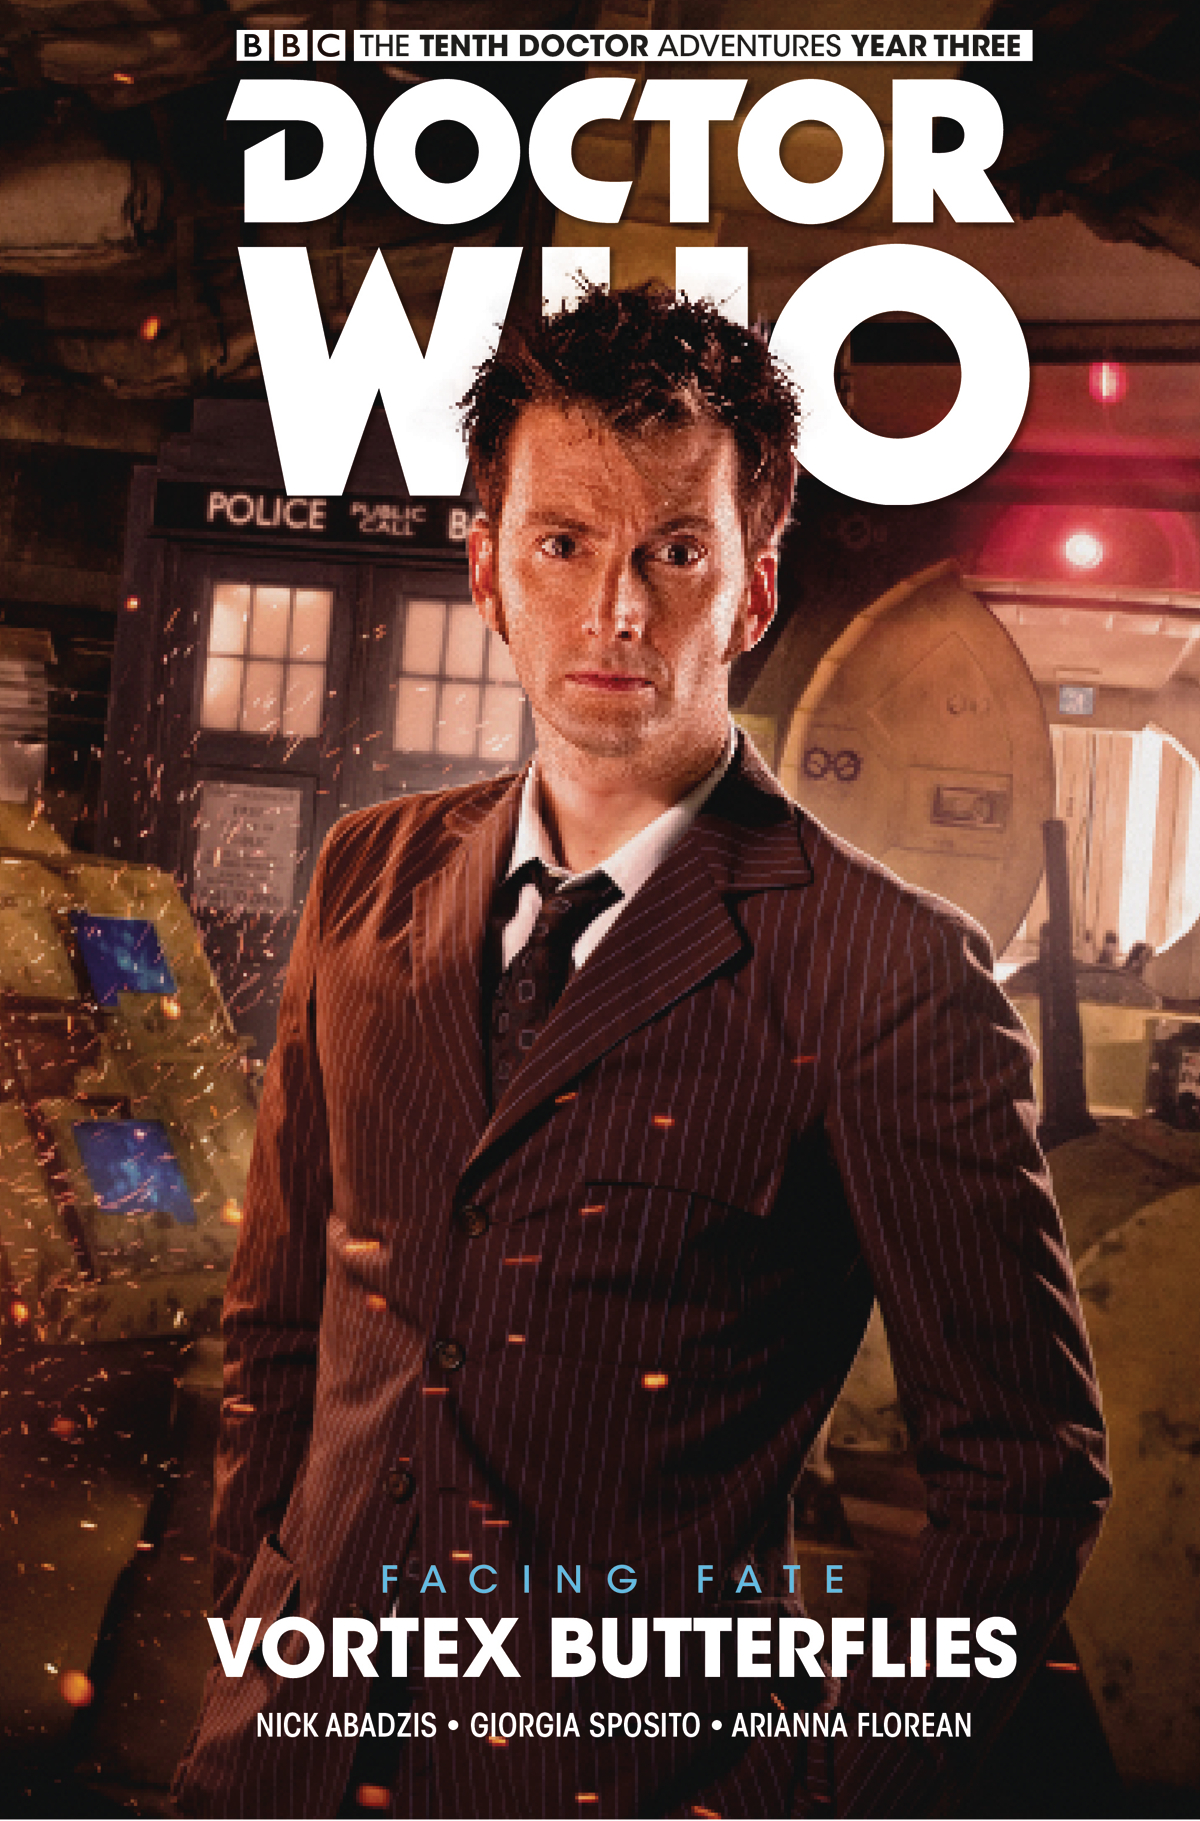 Doctor Who 10th Doctor Facing Fate Hardcover Graphic Novel Volume 2 Vortex Butterflies